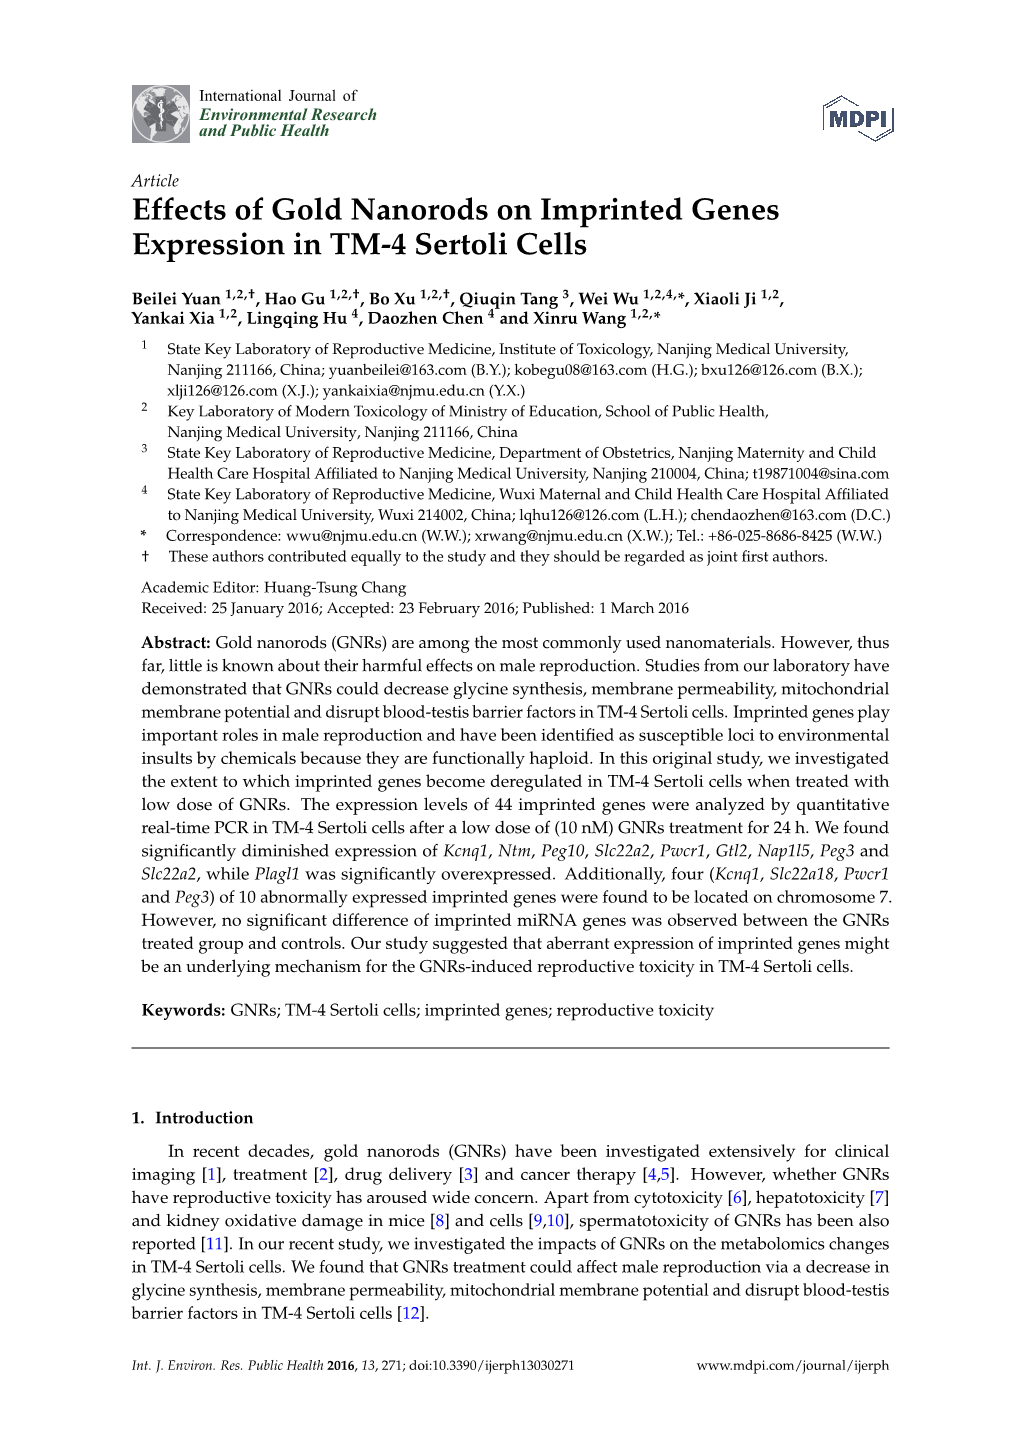 Effects of Gold Nanorods on Imprinted Genes Expression in TM-4 Sertoli Cells